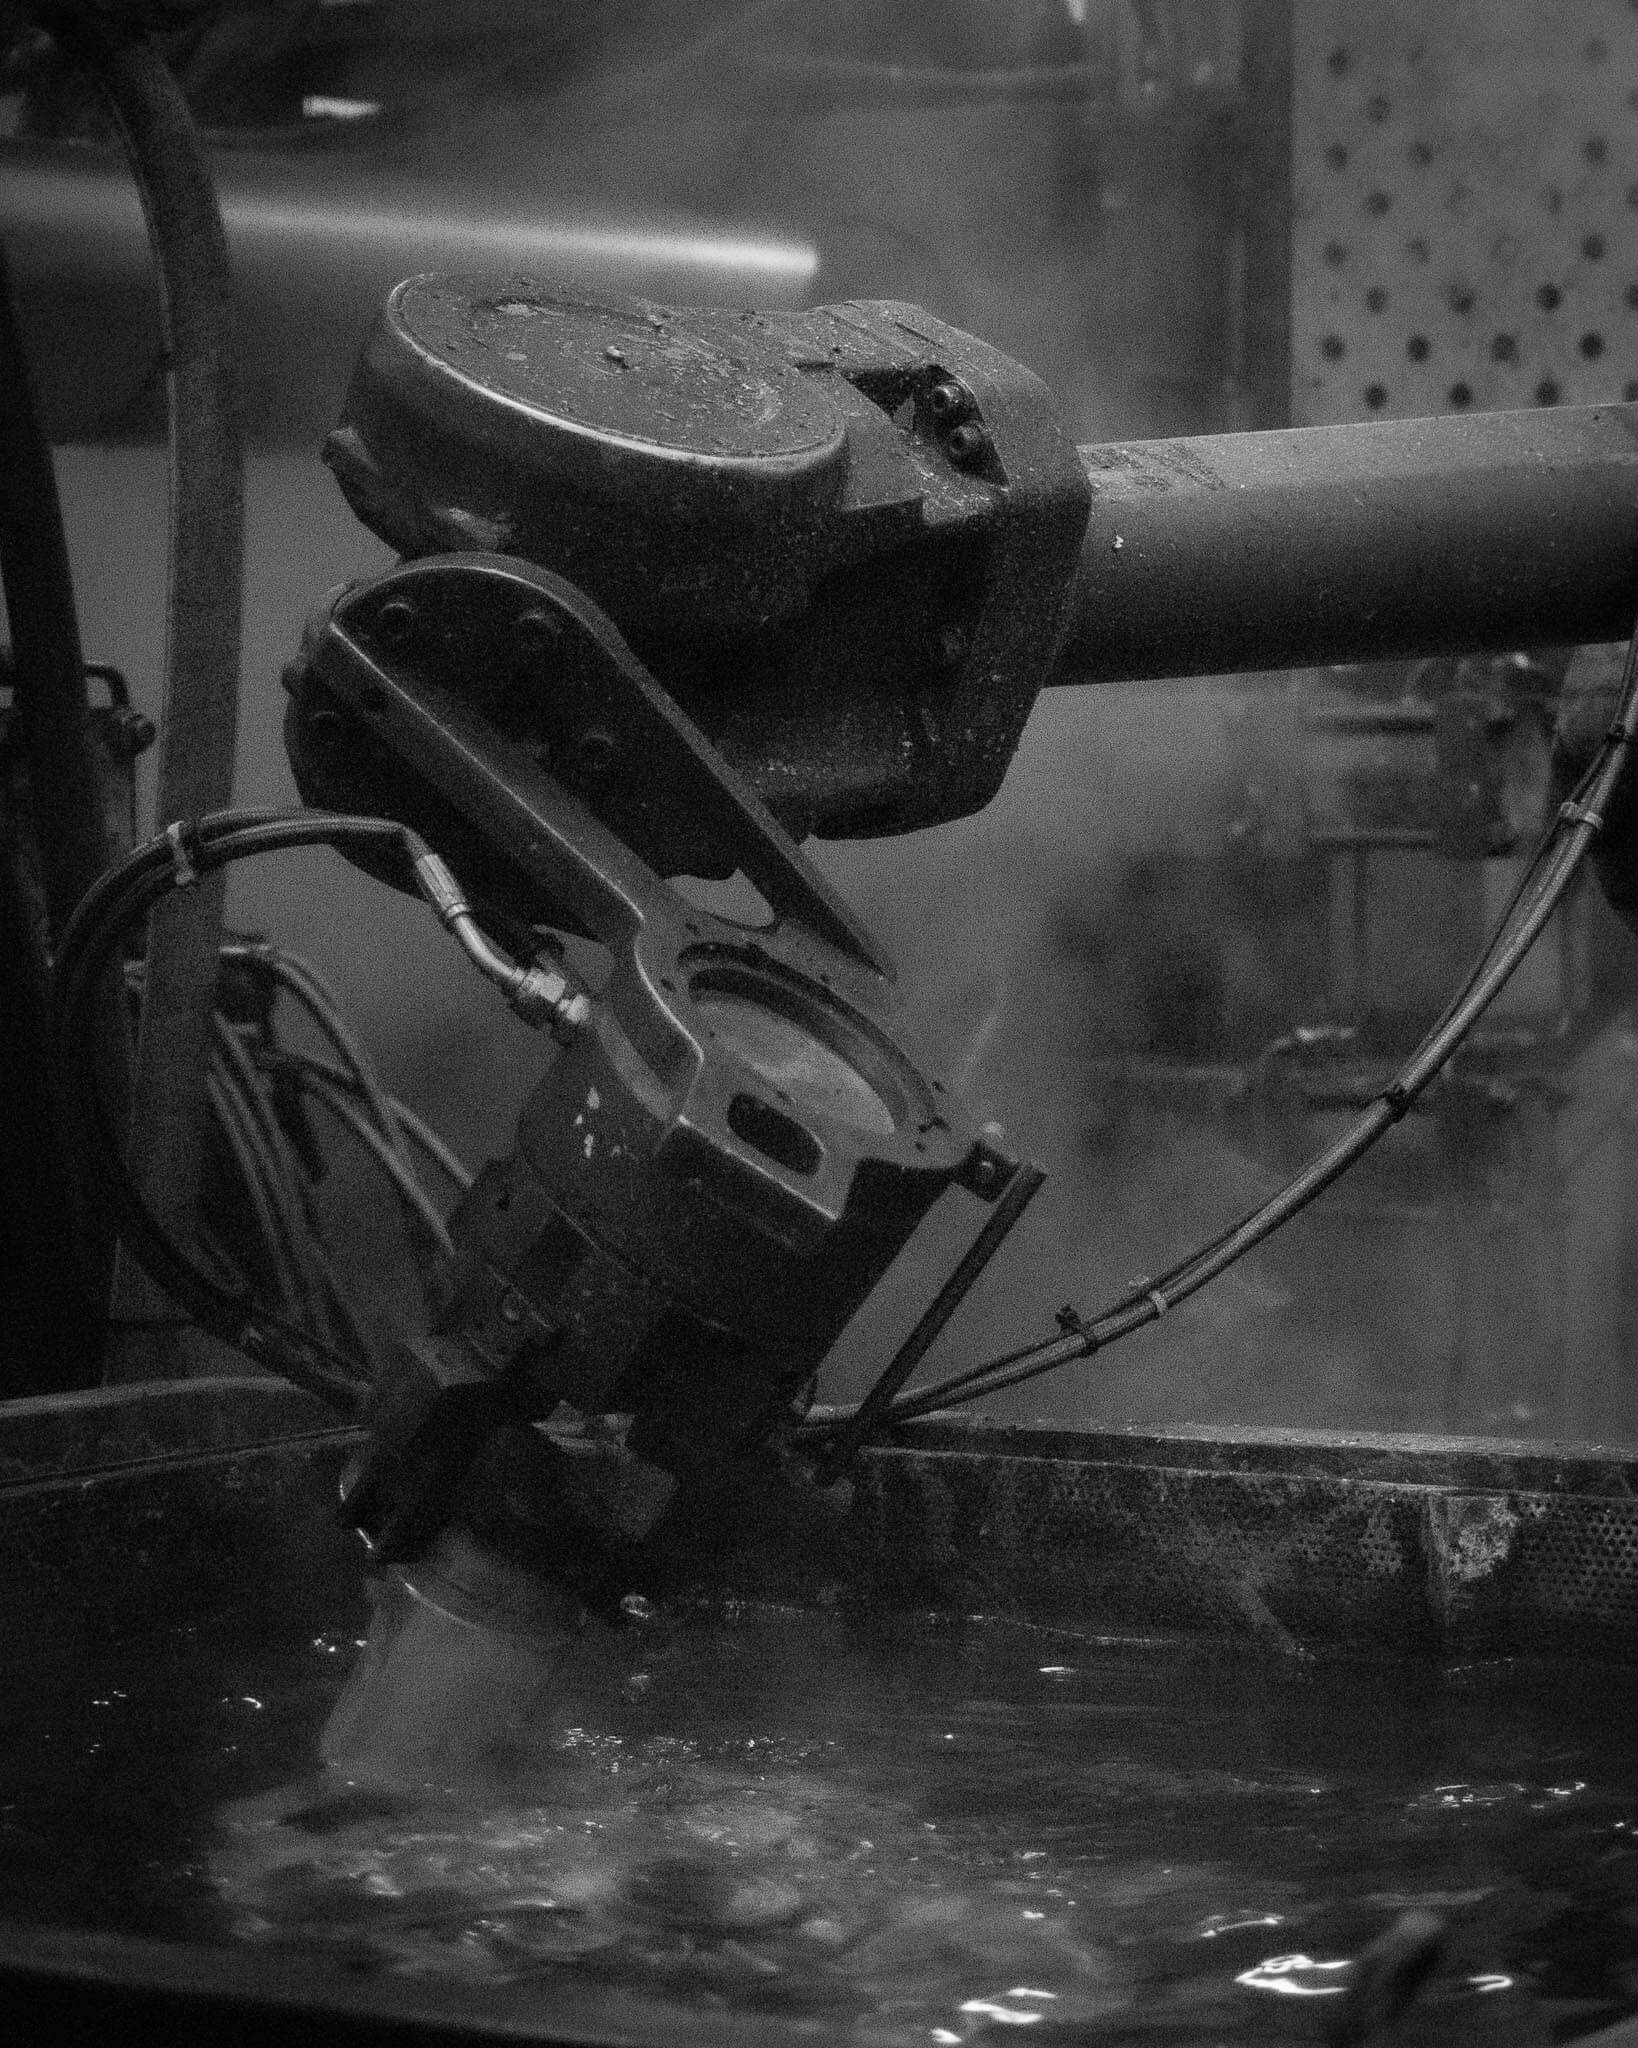 parts being cooled in a quench tank in a high pressure die casting cell